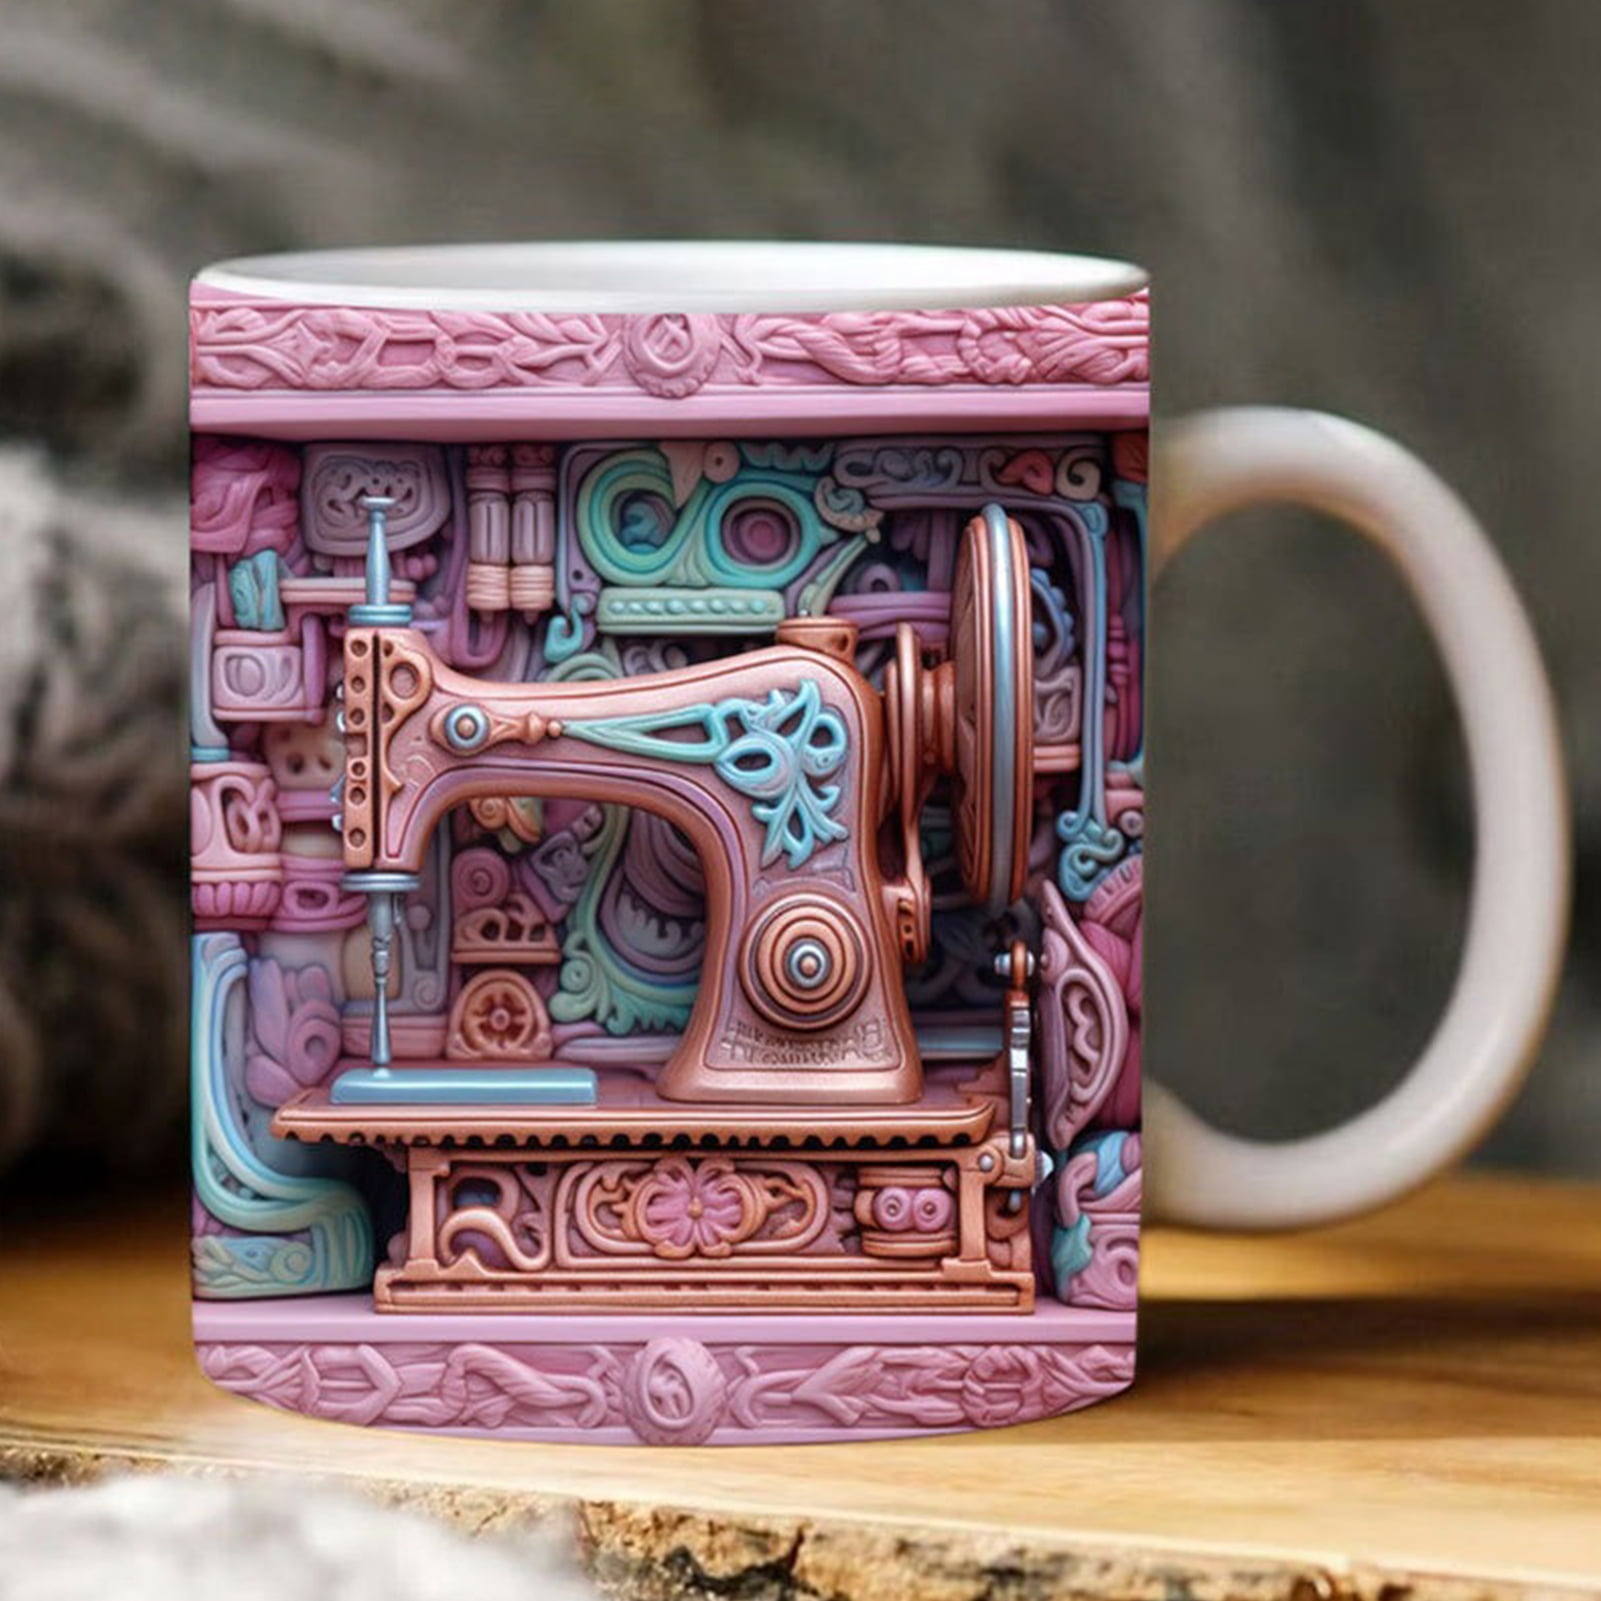 Wharick 3D Sewing Mug, Ceramics Sewing Machine Cup, Creative 3D Mug for  Christmas Gifts, Unique Style, for Any Kitchen